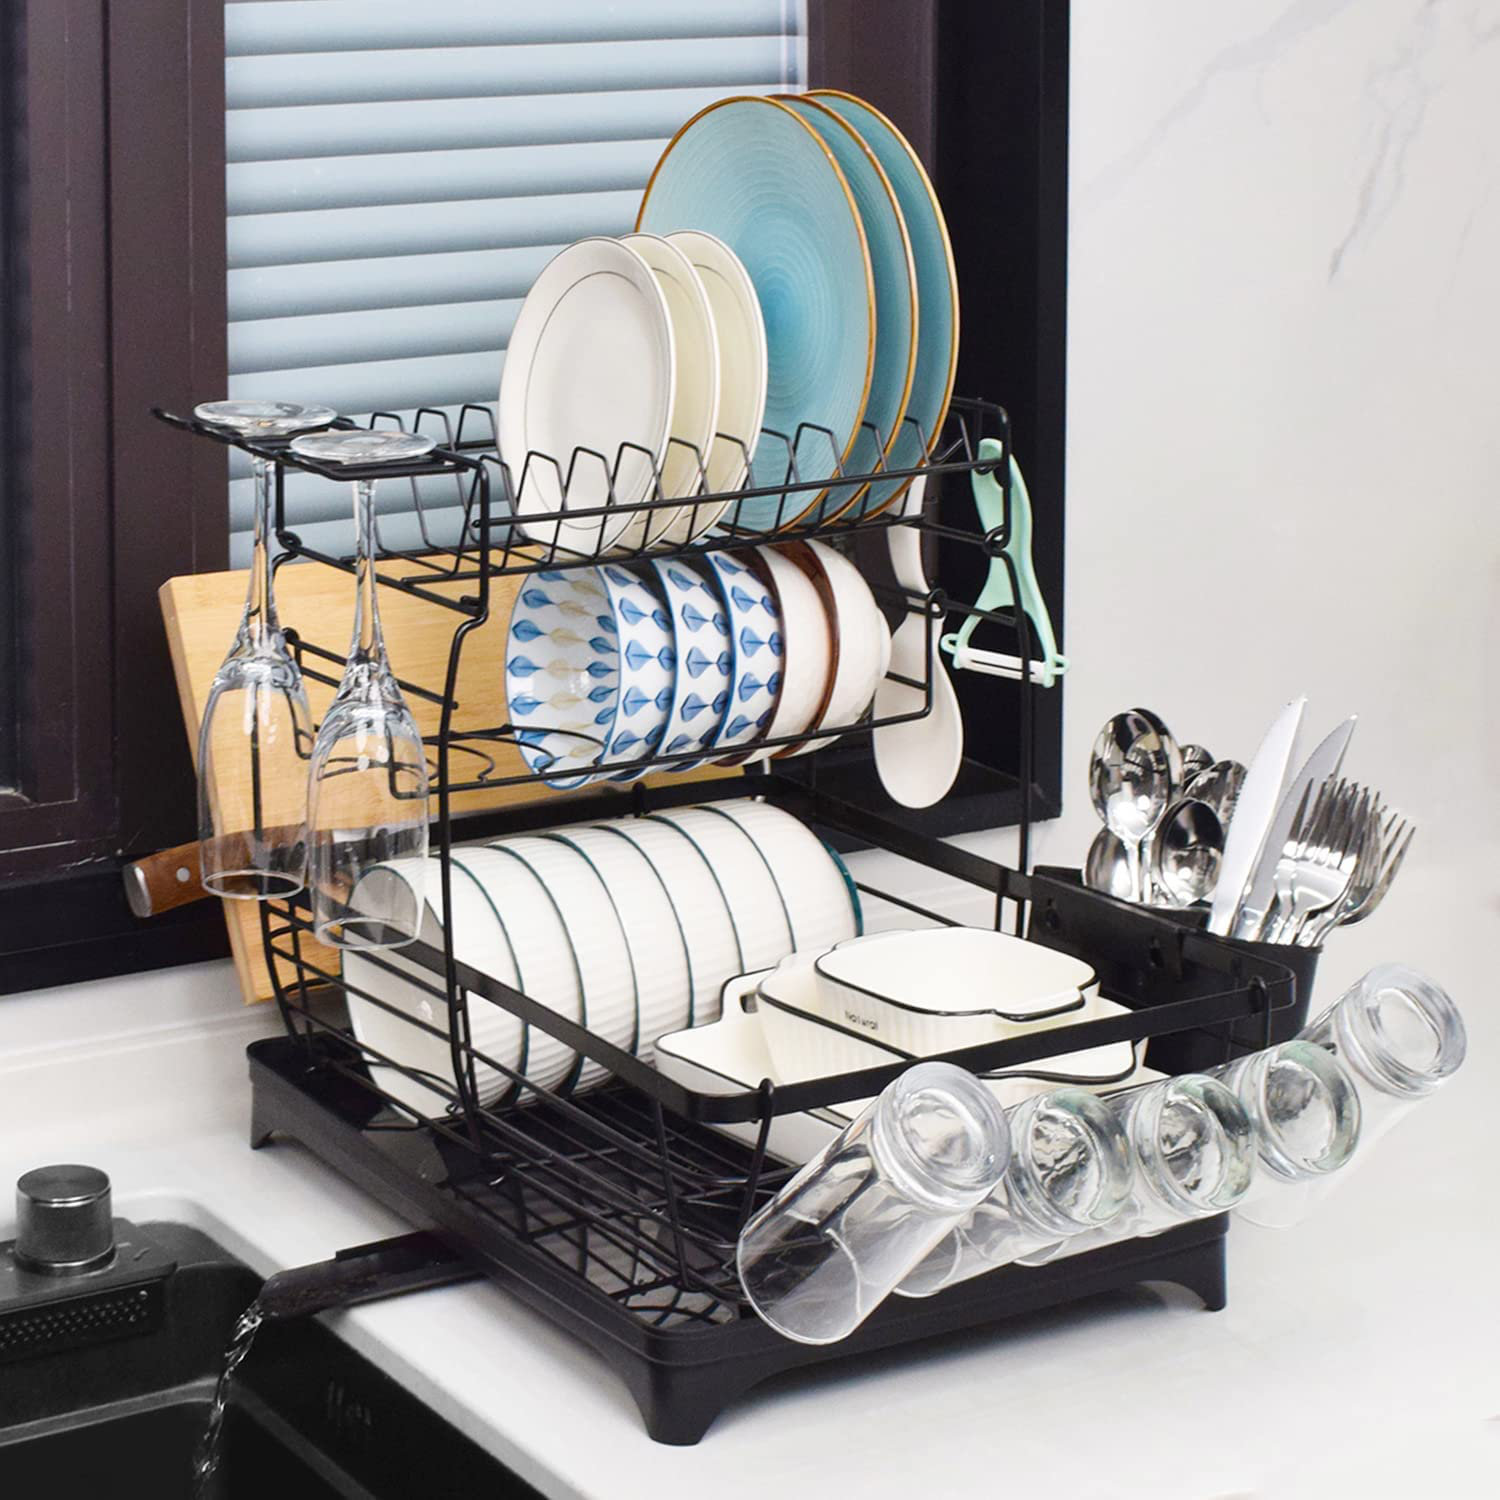 Stainless Steel Dish Rack SAYZH